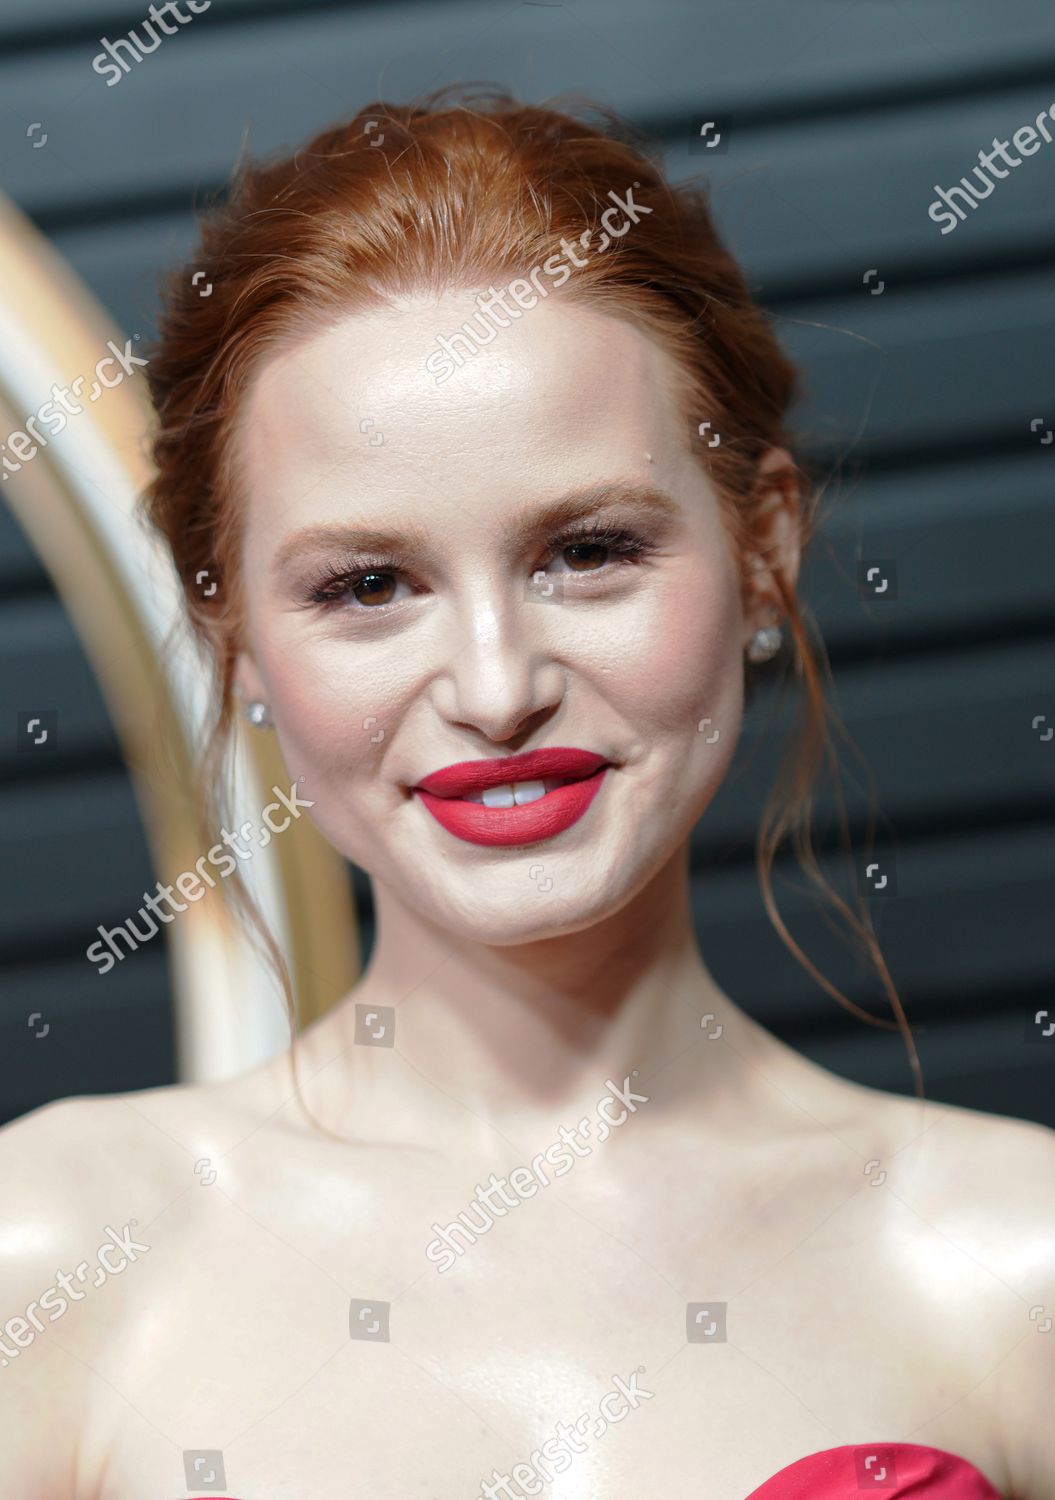 Madelaine Petsch at the 2020 Mercedes Benz Academy Awards Viewing Party